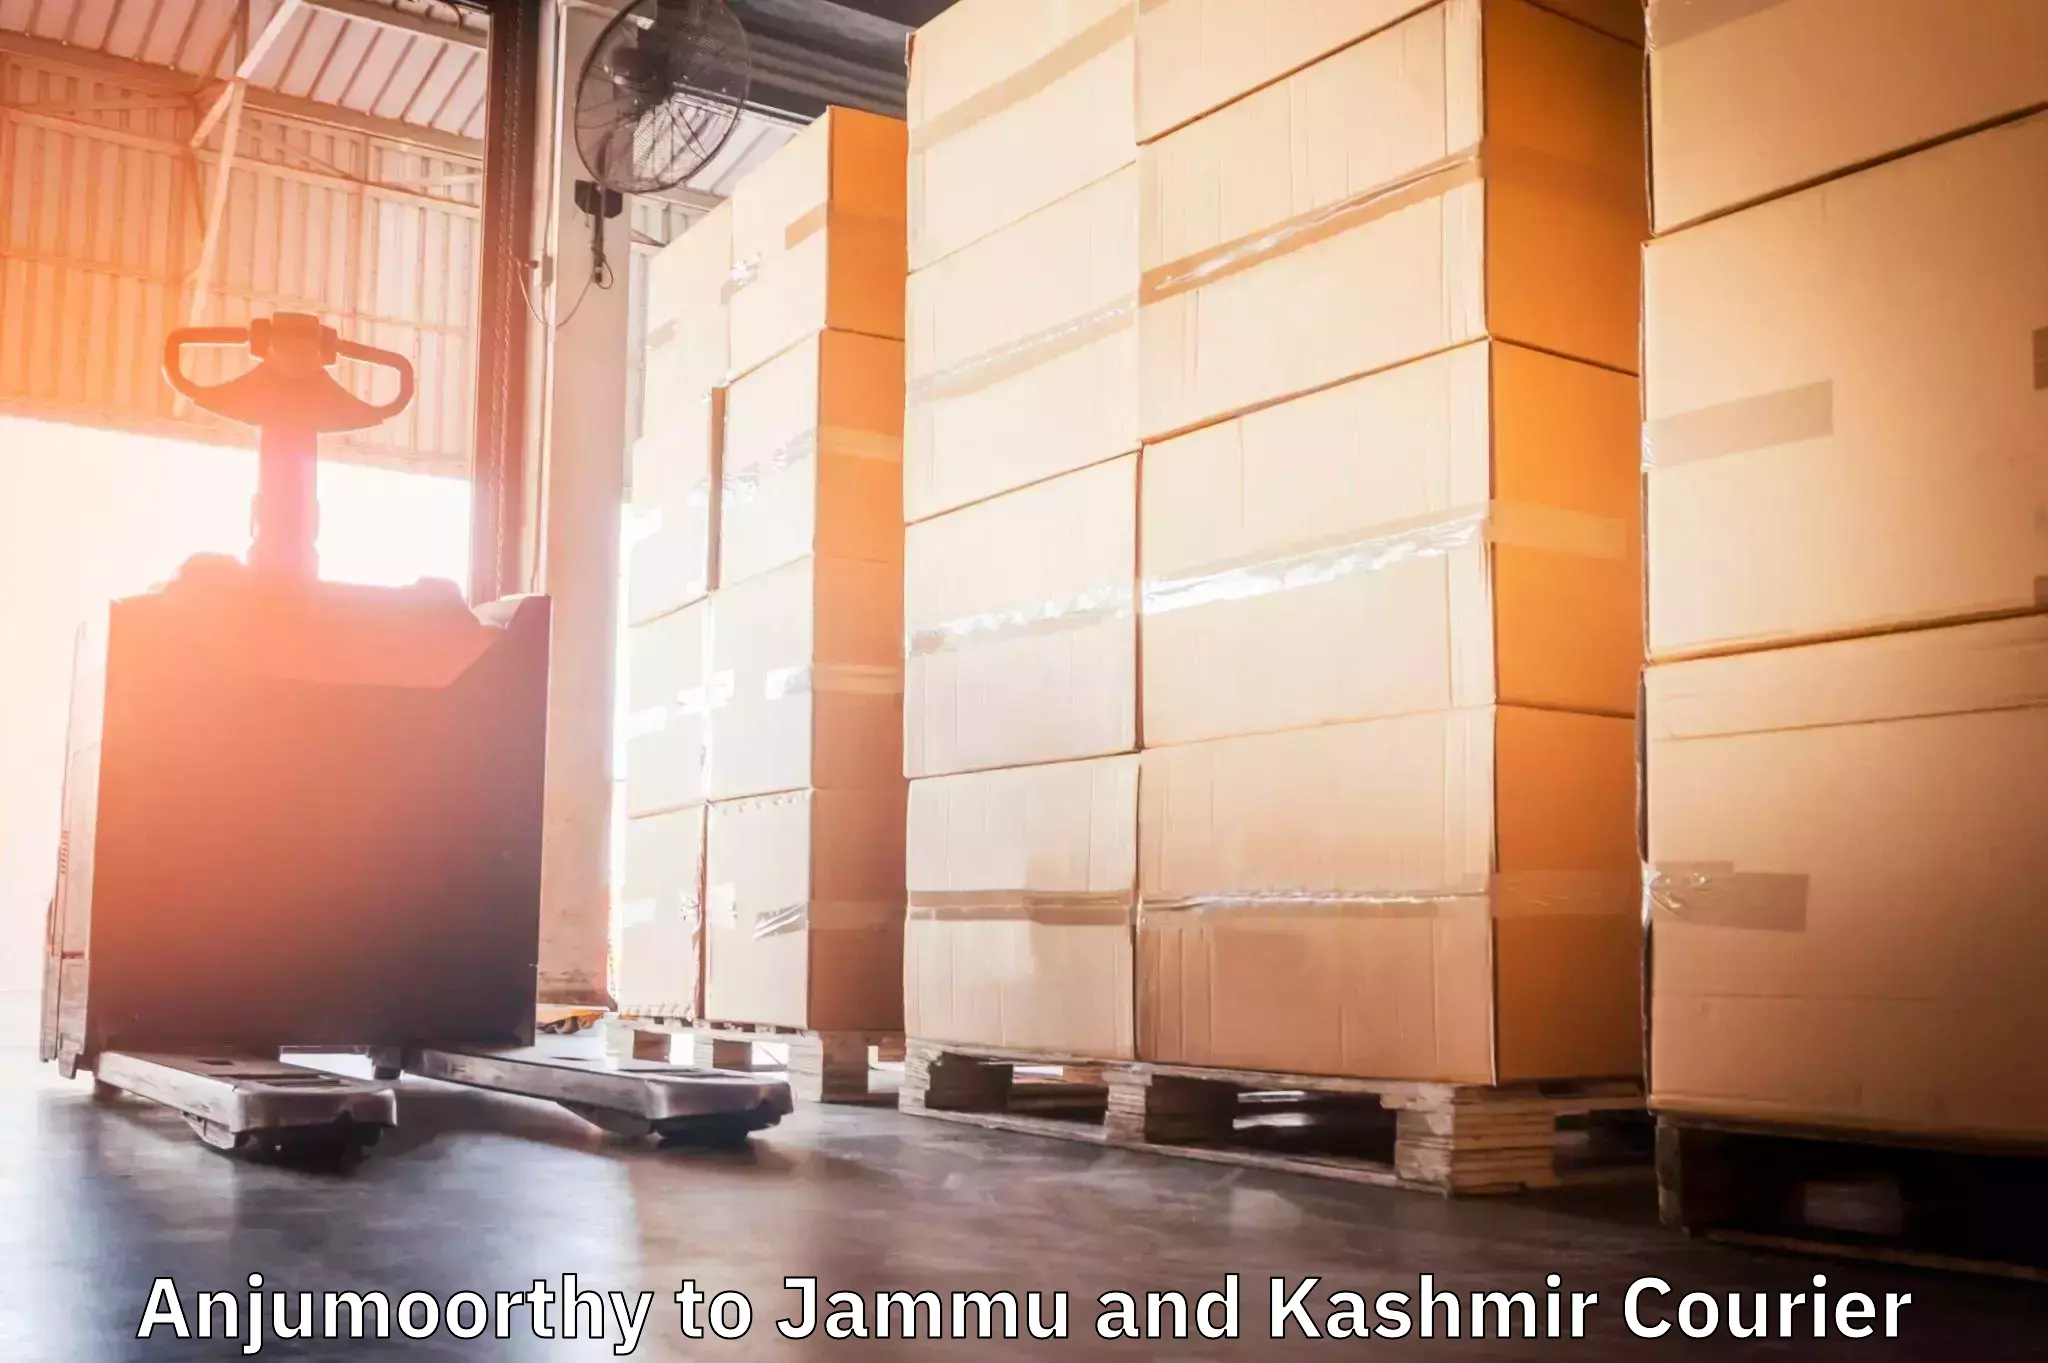 Comprehensive freight services Anjumoorthy to Shopian